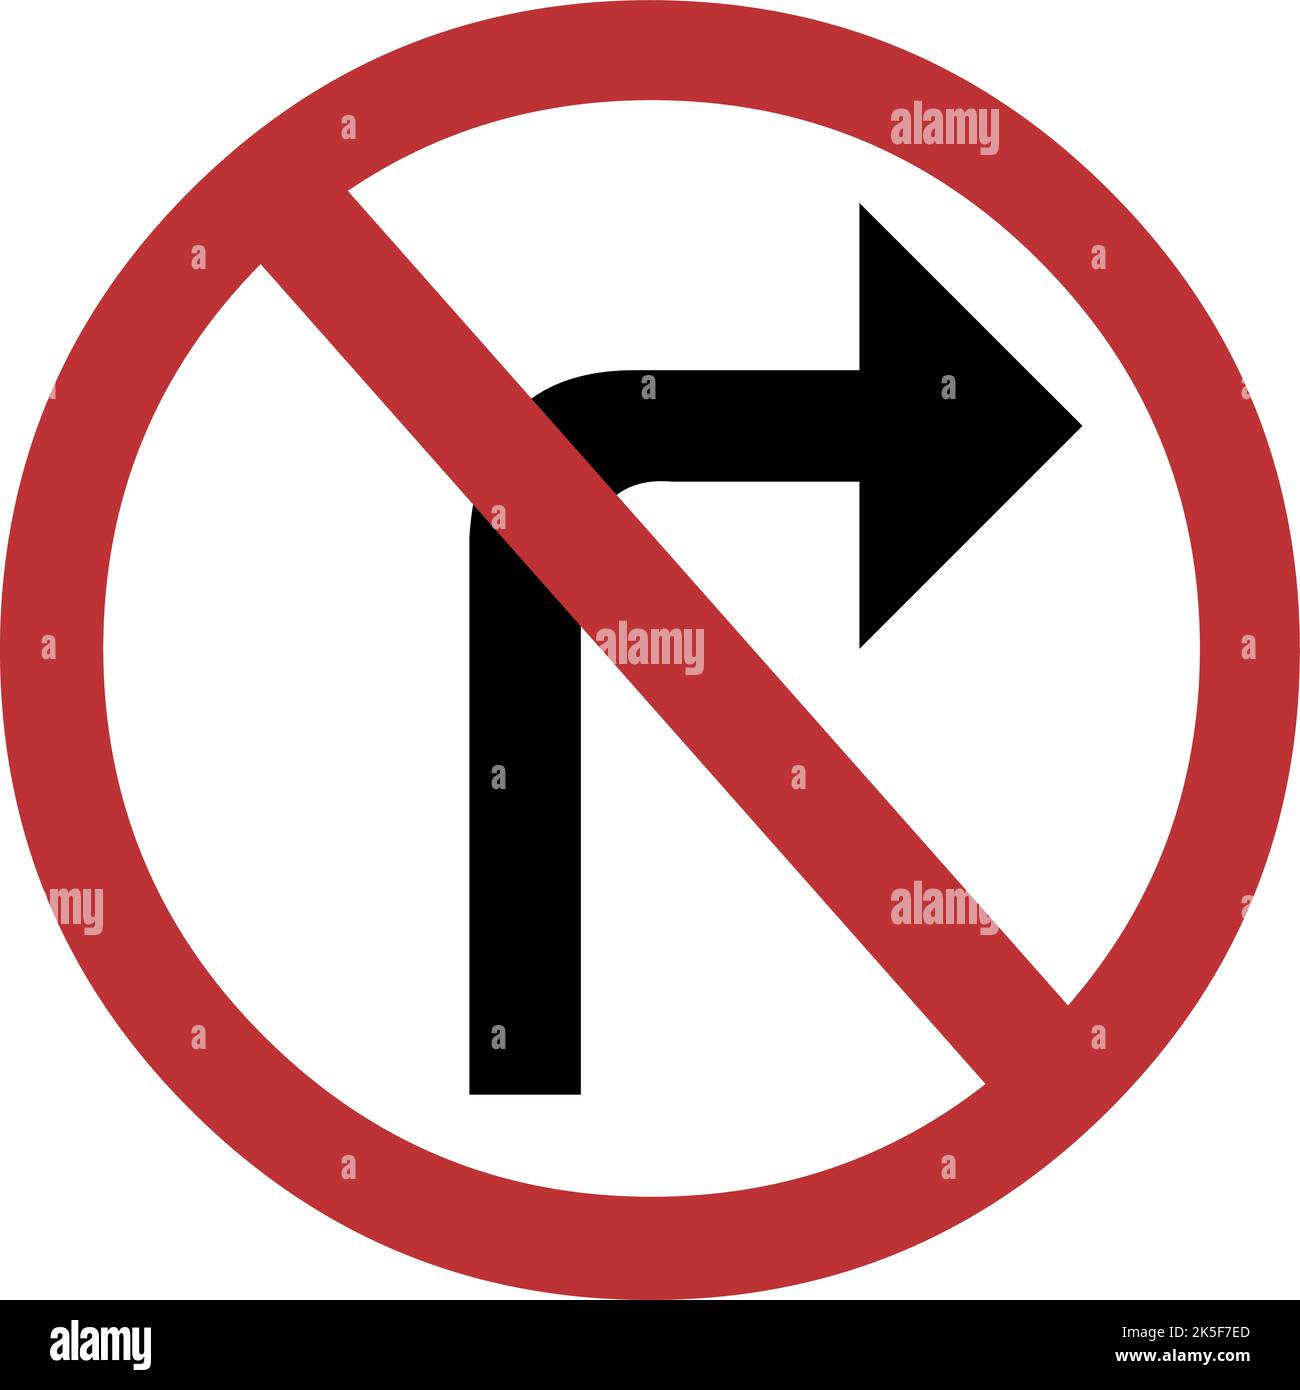 Vector illustration of forbidden traffic sign with a curved black arrow to the right, on a circular background of red and white color Stock Vector